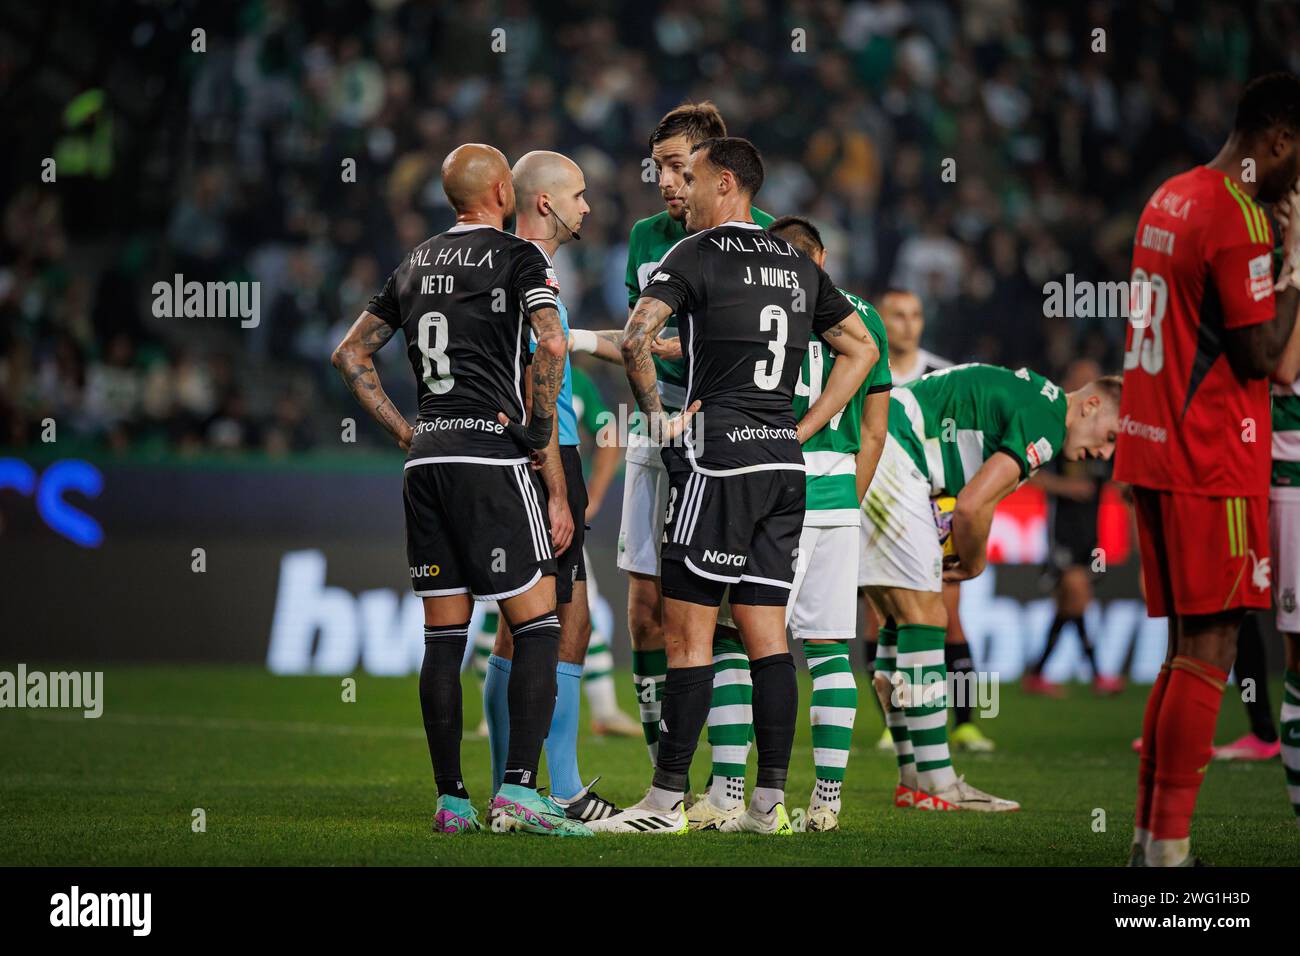 Players of both teams (Neto, Joao Nunes, Sebastian Coates) argue with referee Helder Carvalho) during Liga Portugal 23/24 game between Sporting CP and Stock Photo